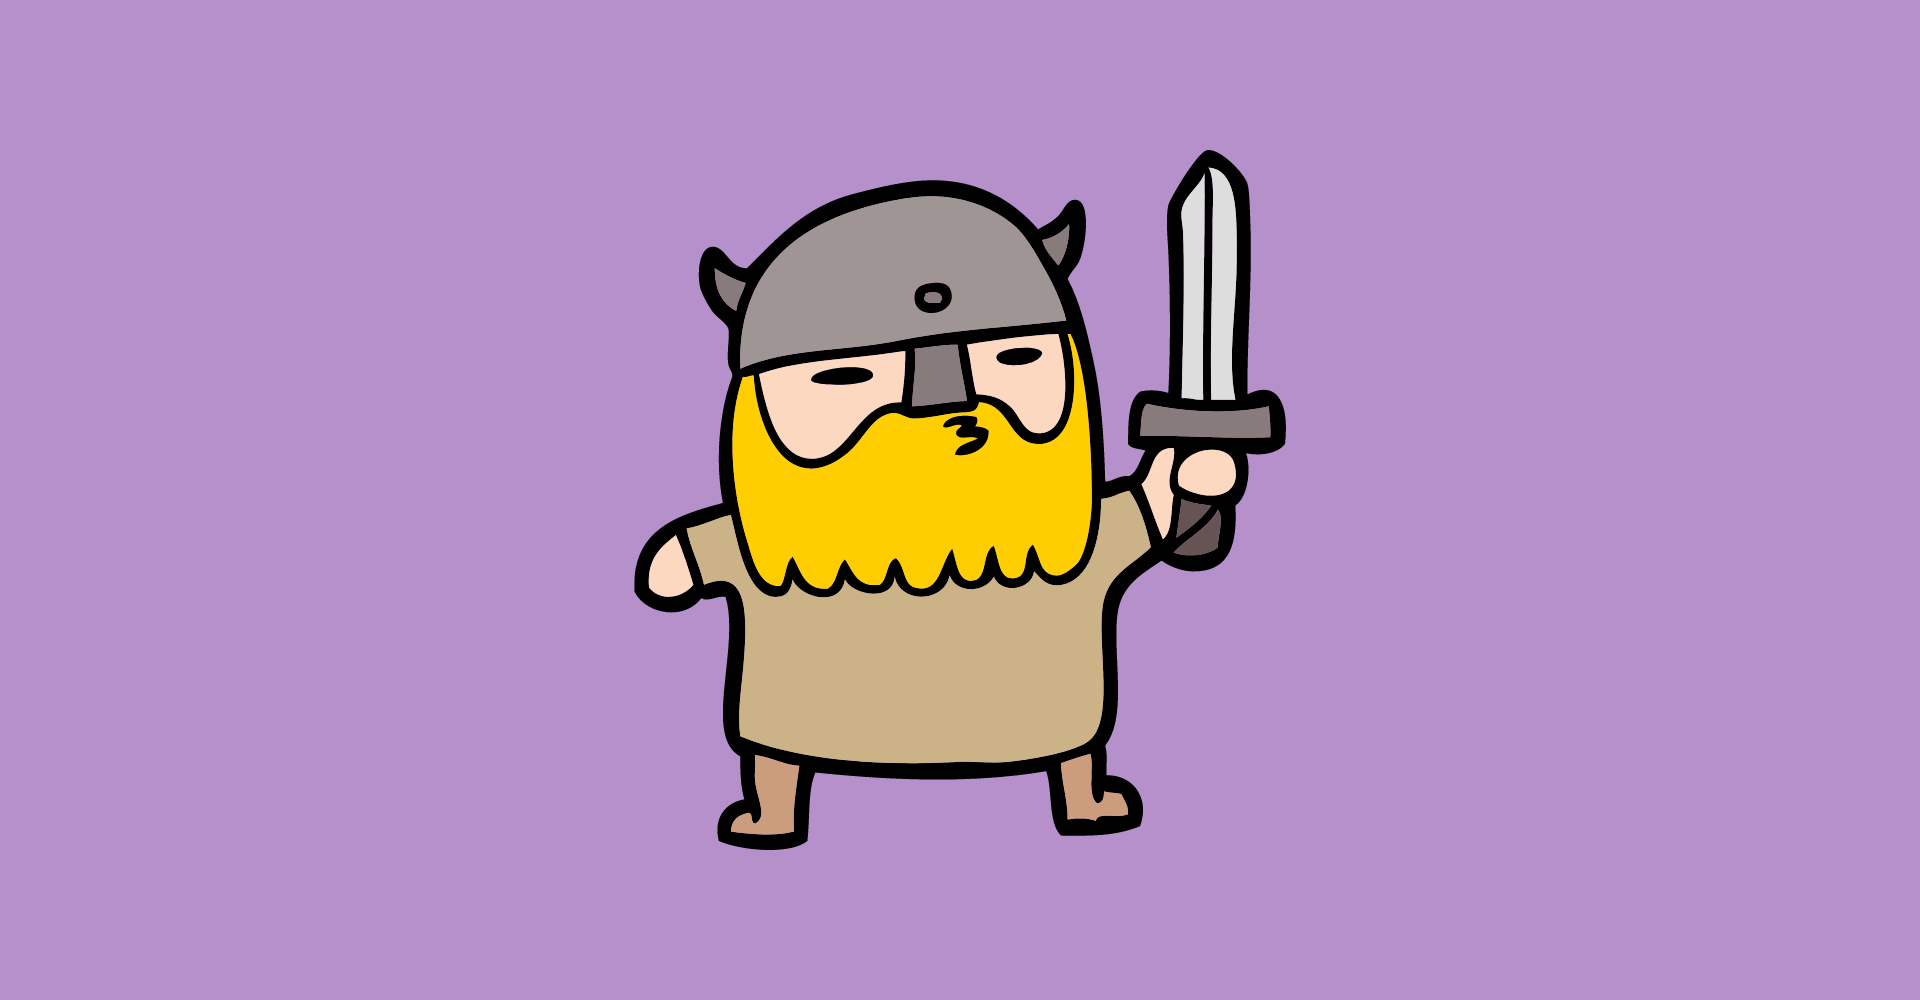 illustrated cute norse viking holding a sword on purple background for gift guide article